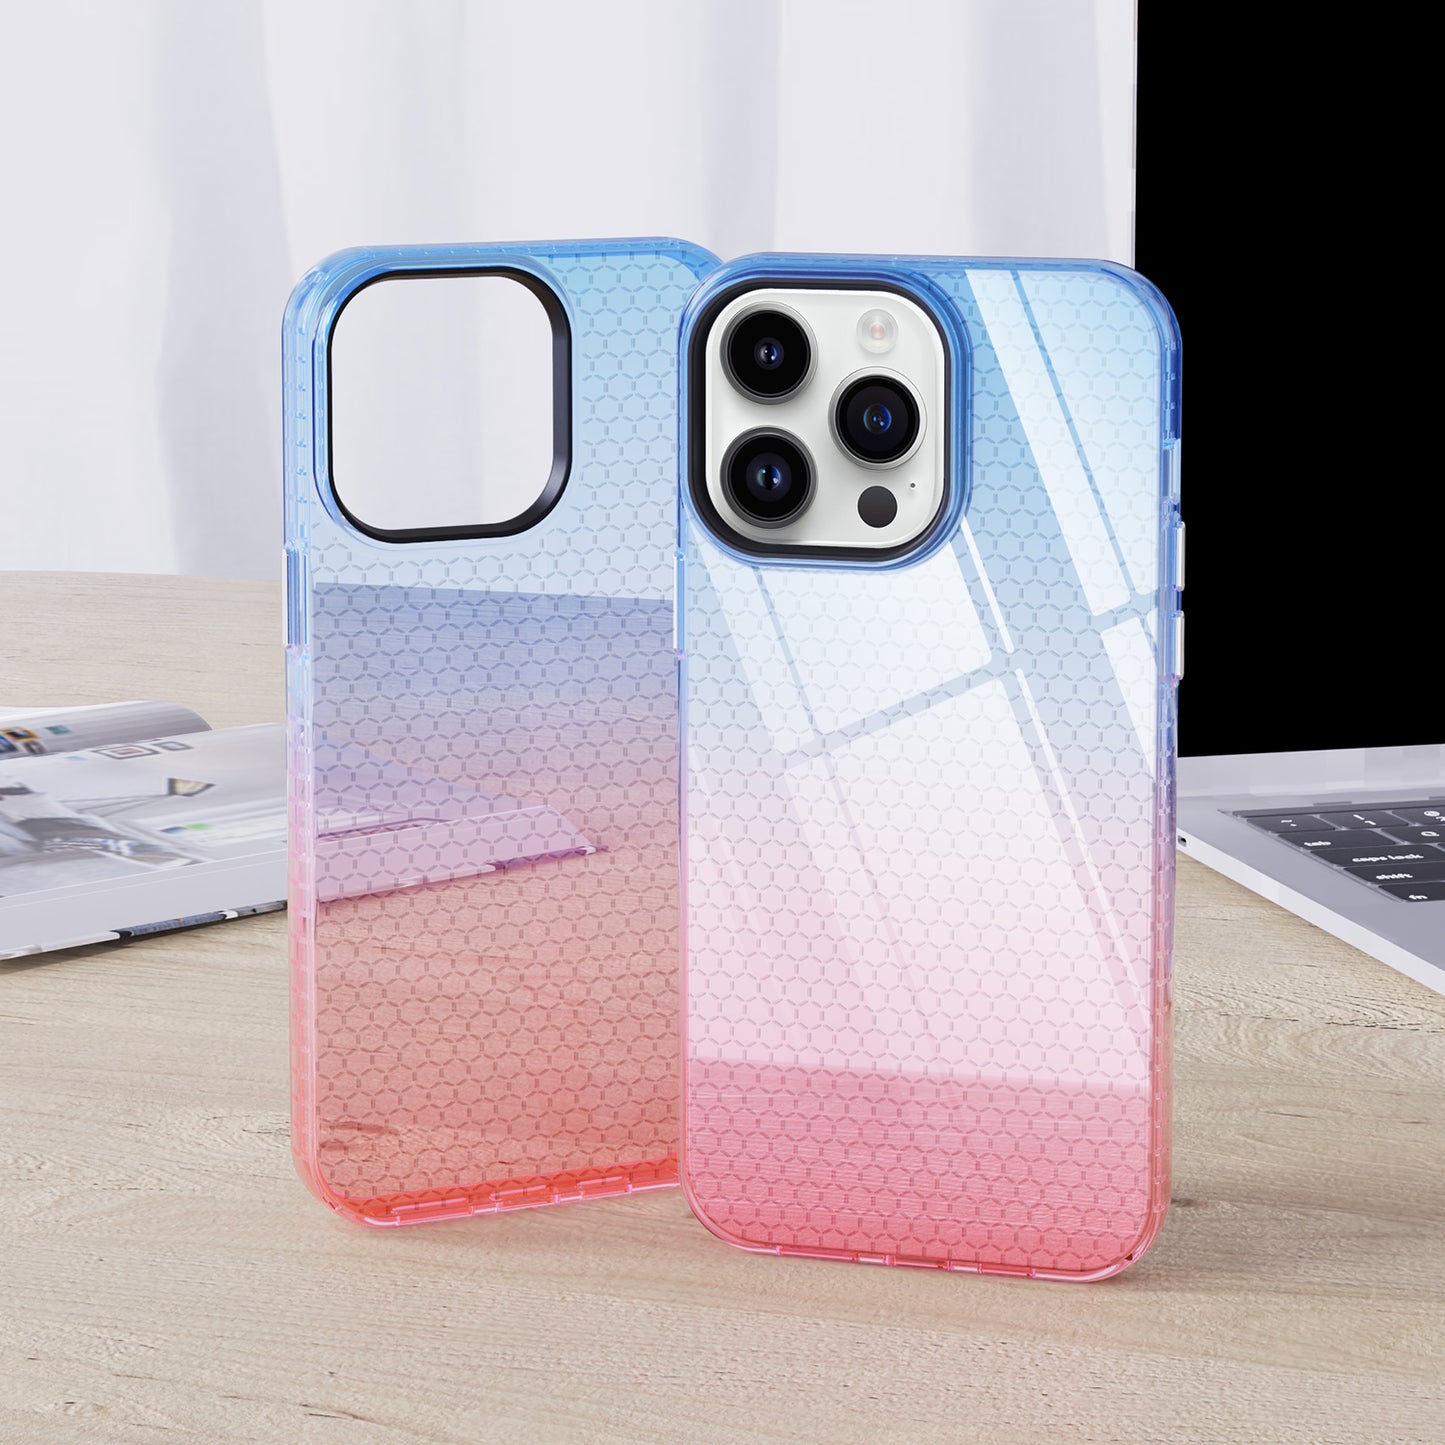 Unique Design Colorful Soft Back Cover Cell Phone Case for iPhone 12 Pro Max case